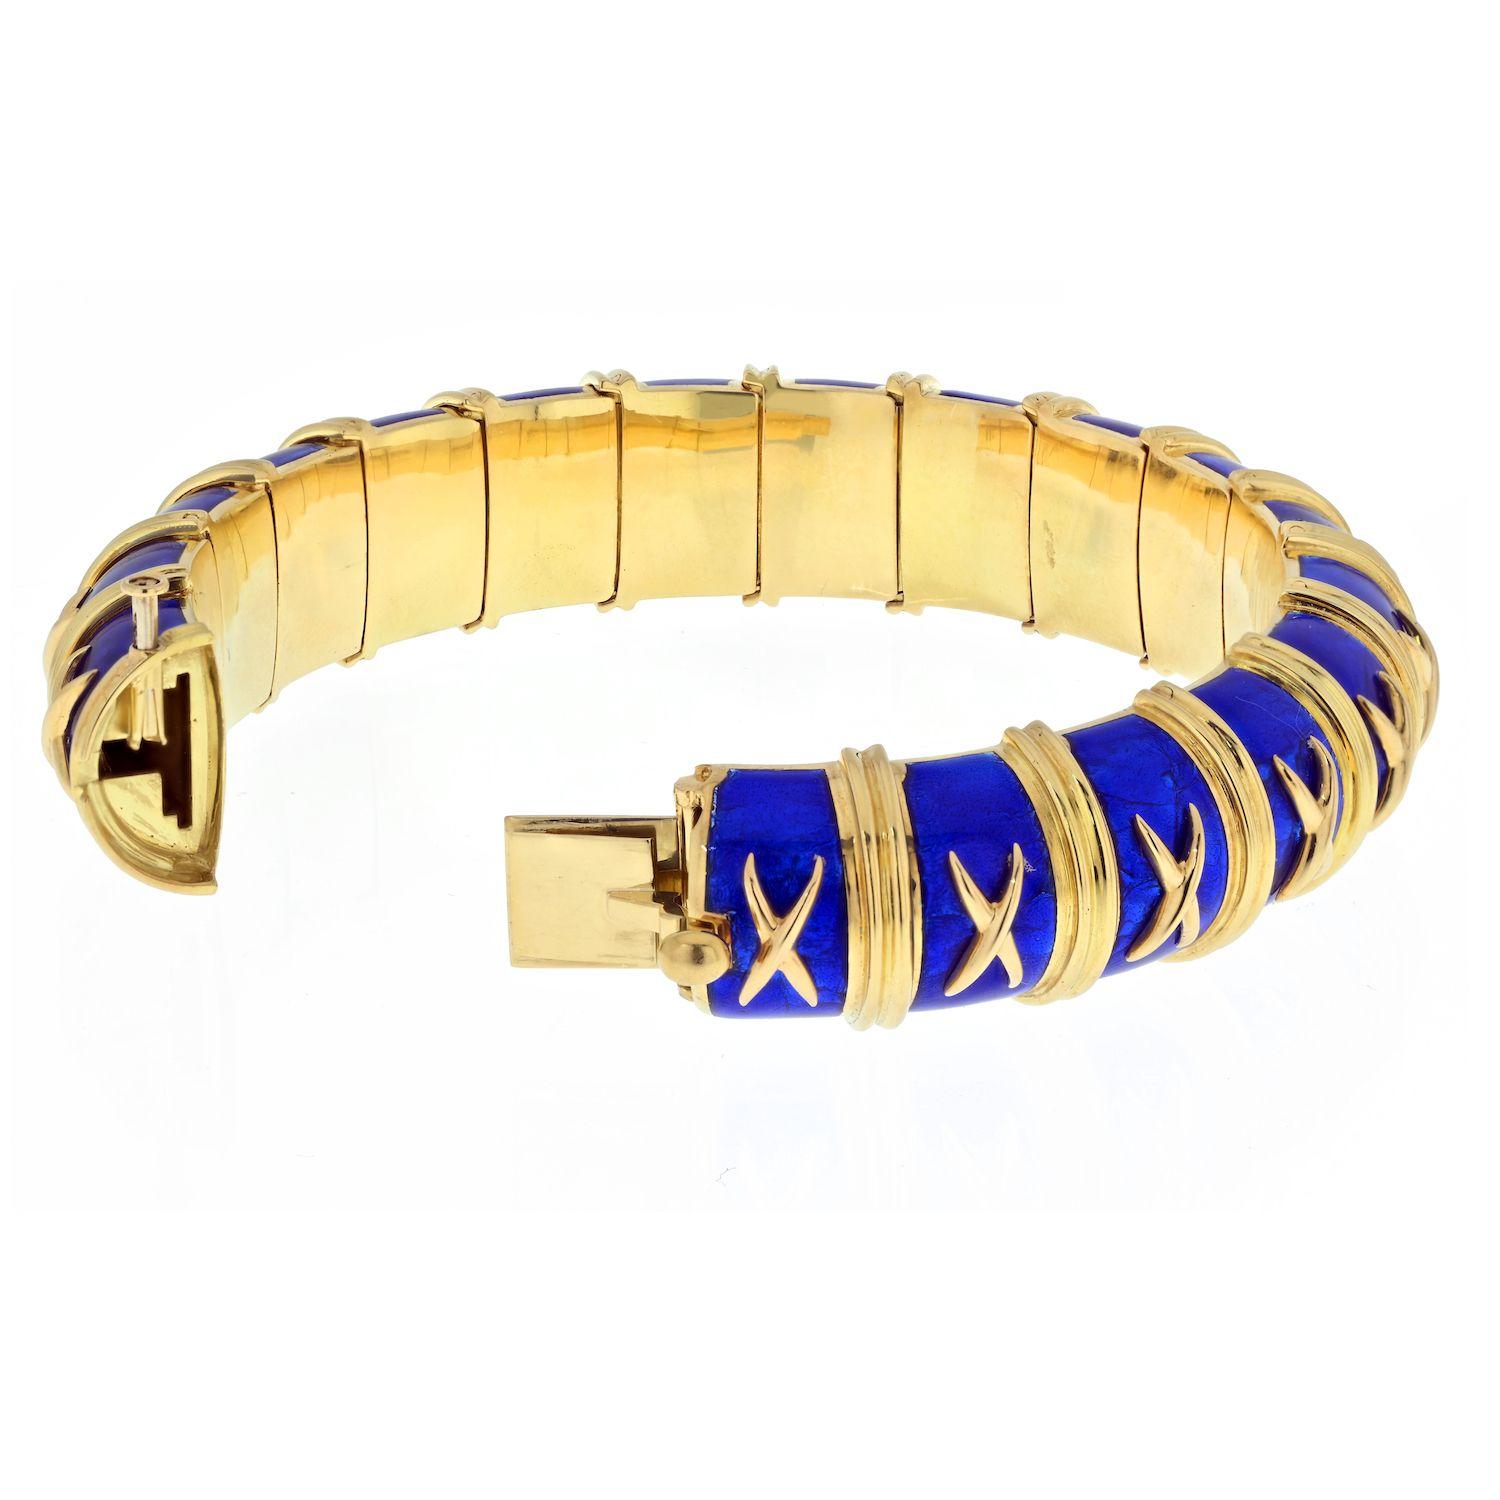 A remarkable estate treasure, the Tiffany & Co. Schlumberger Bangle adorned with exquisite blue enamel. Imprinted with the renowned Tiffany & Co. Schlumberger patern and signature, this bangle exudes sophistication and luxury. Fashioned from 18